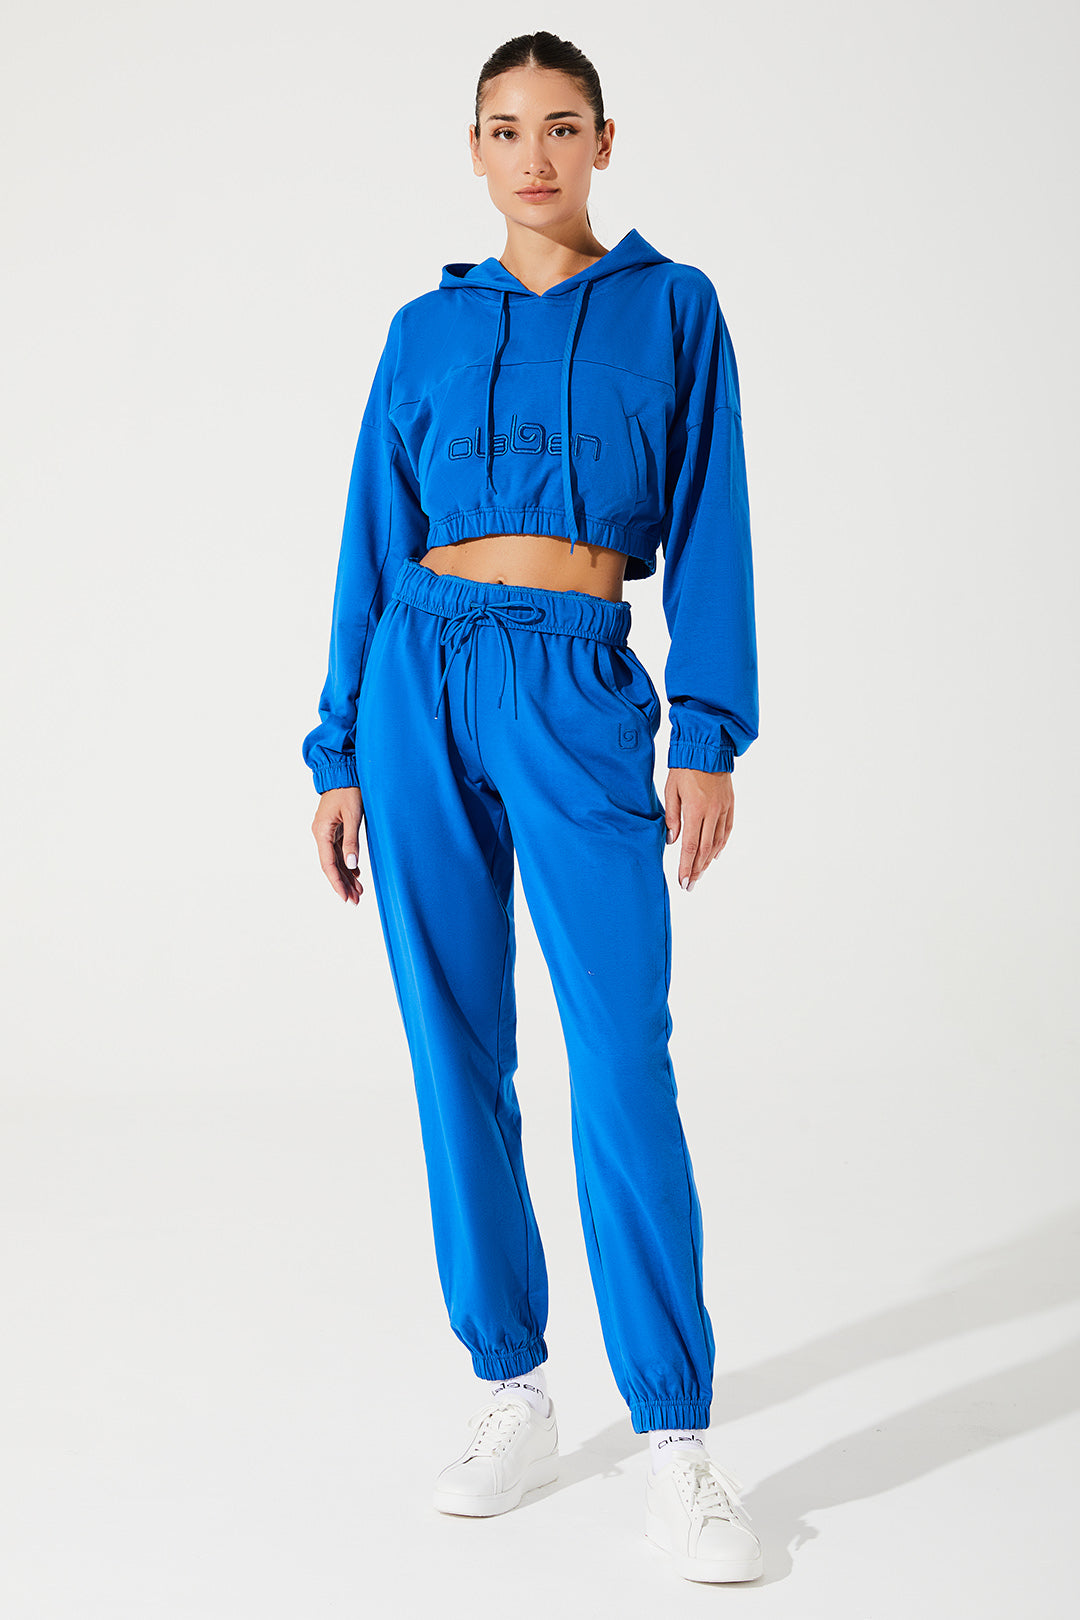 Janet wearing Atlantis Blue women's sweatpants, a comfortable and stylish choice for any occasion.